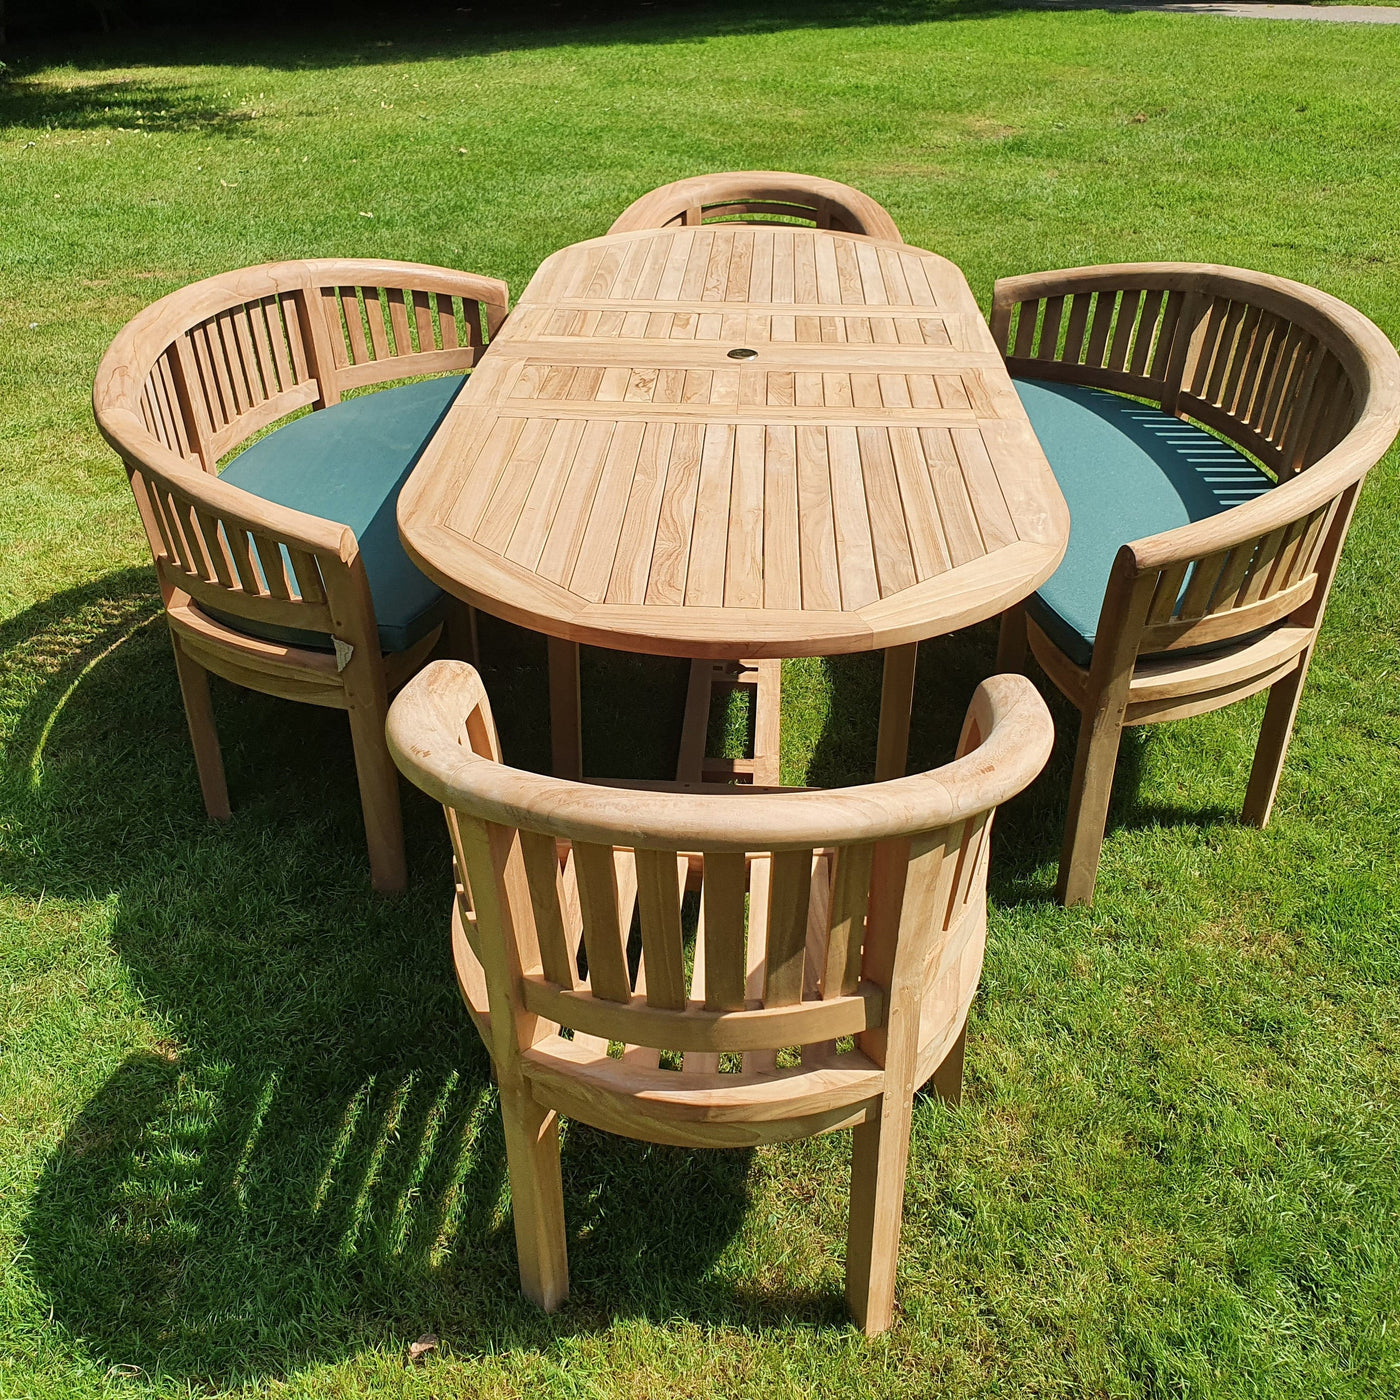 Teak Garden Furniture Set Oval 180 - 240 cm Extending Table (2 San Francisco Chairs & 2 Benches ) Cushions Included - Royal finesse